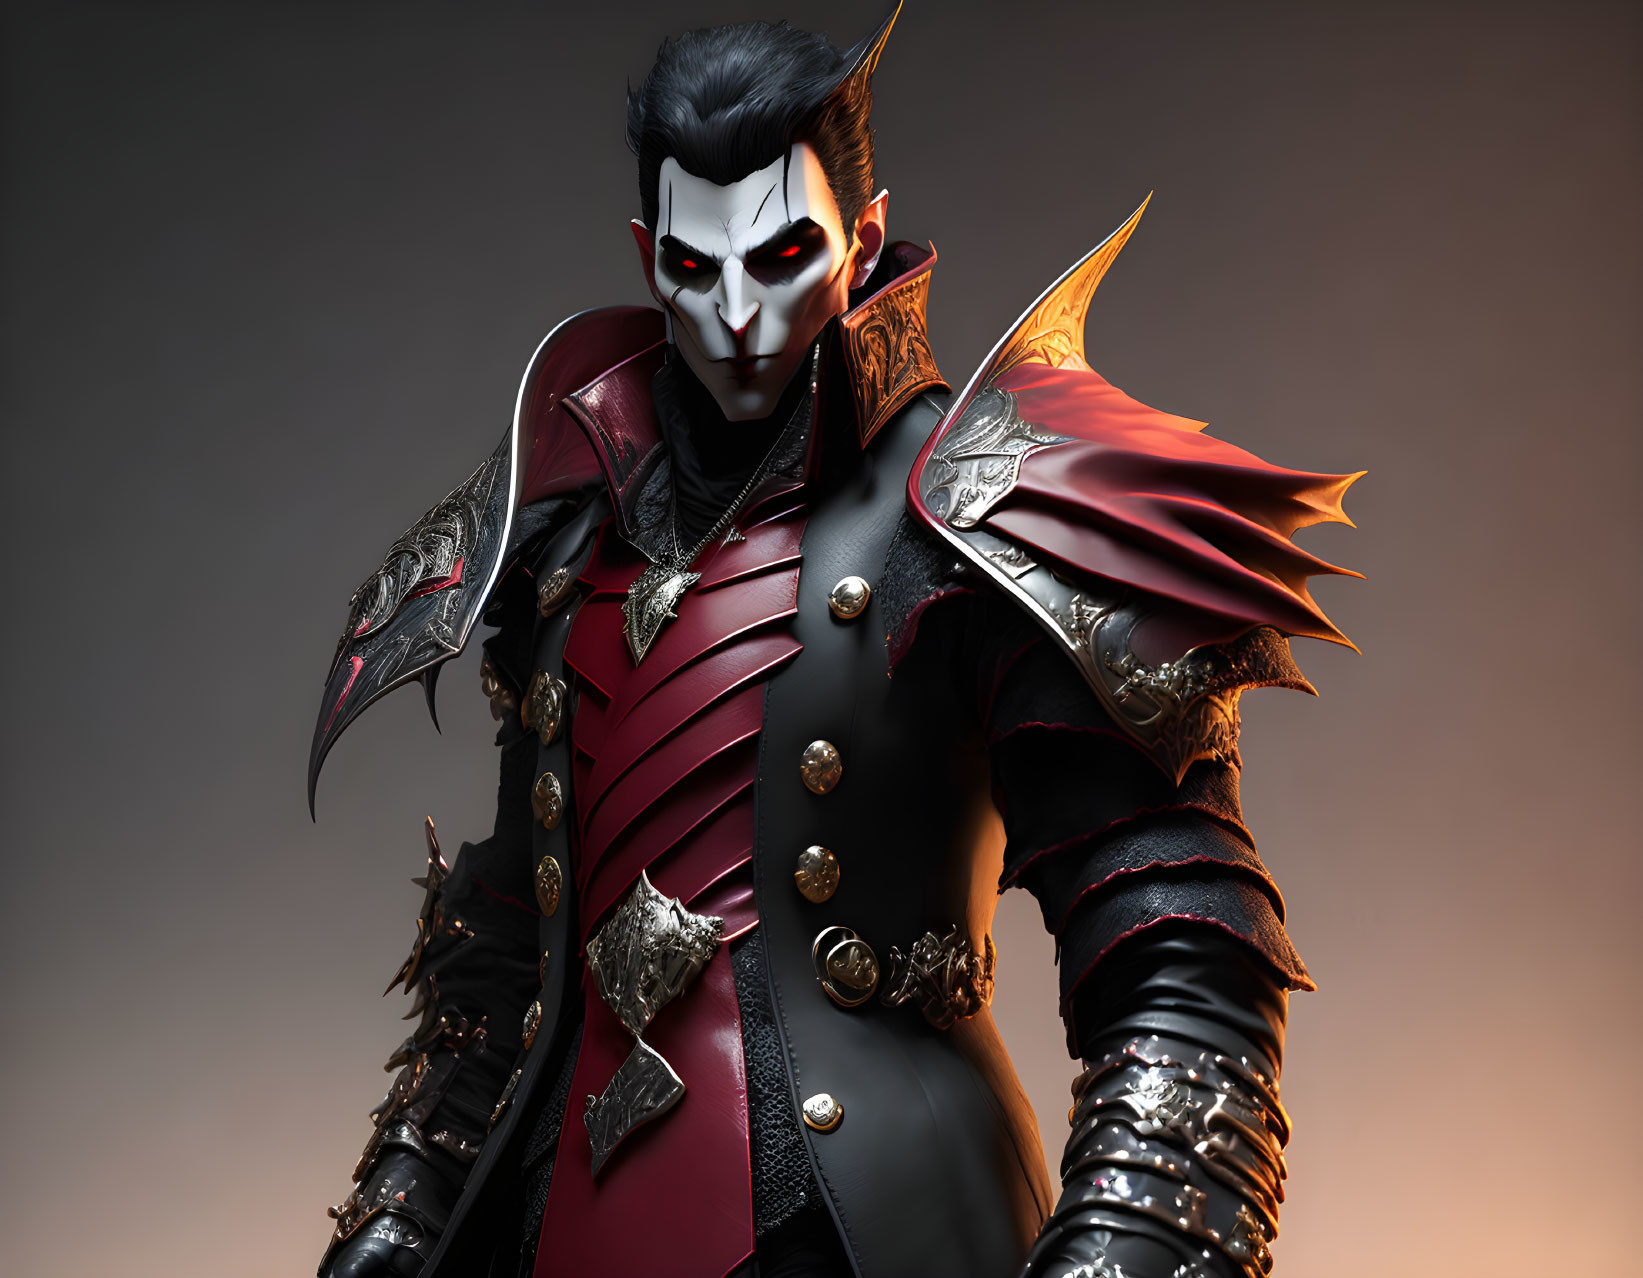 Elaborate armored vampire with piercing eyes in moody setting